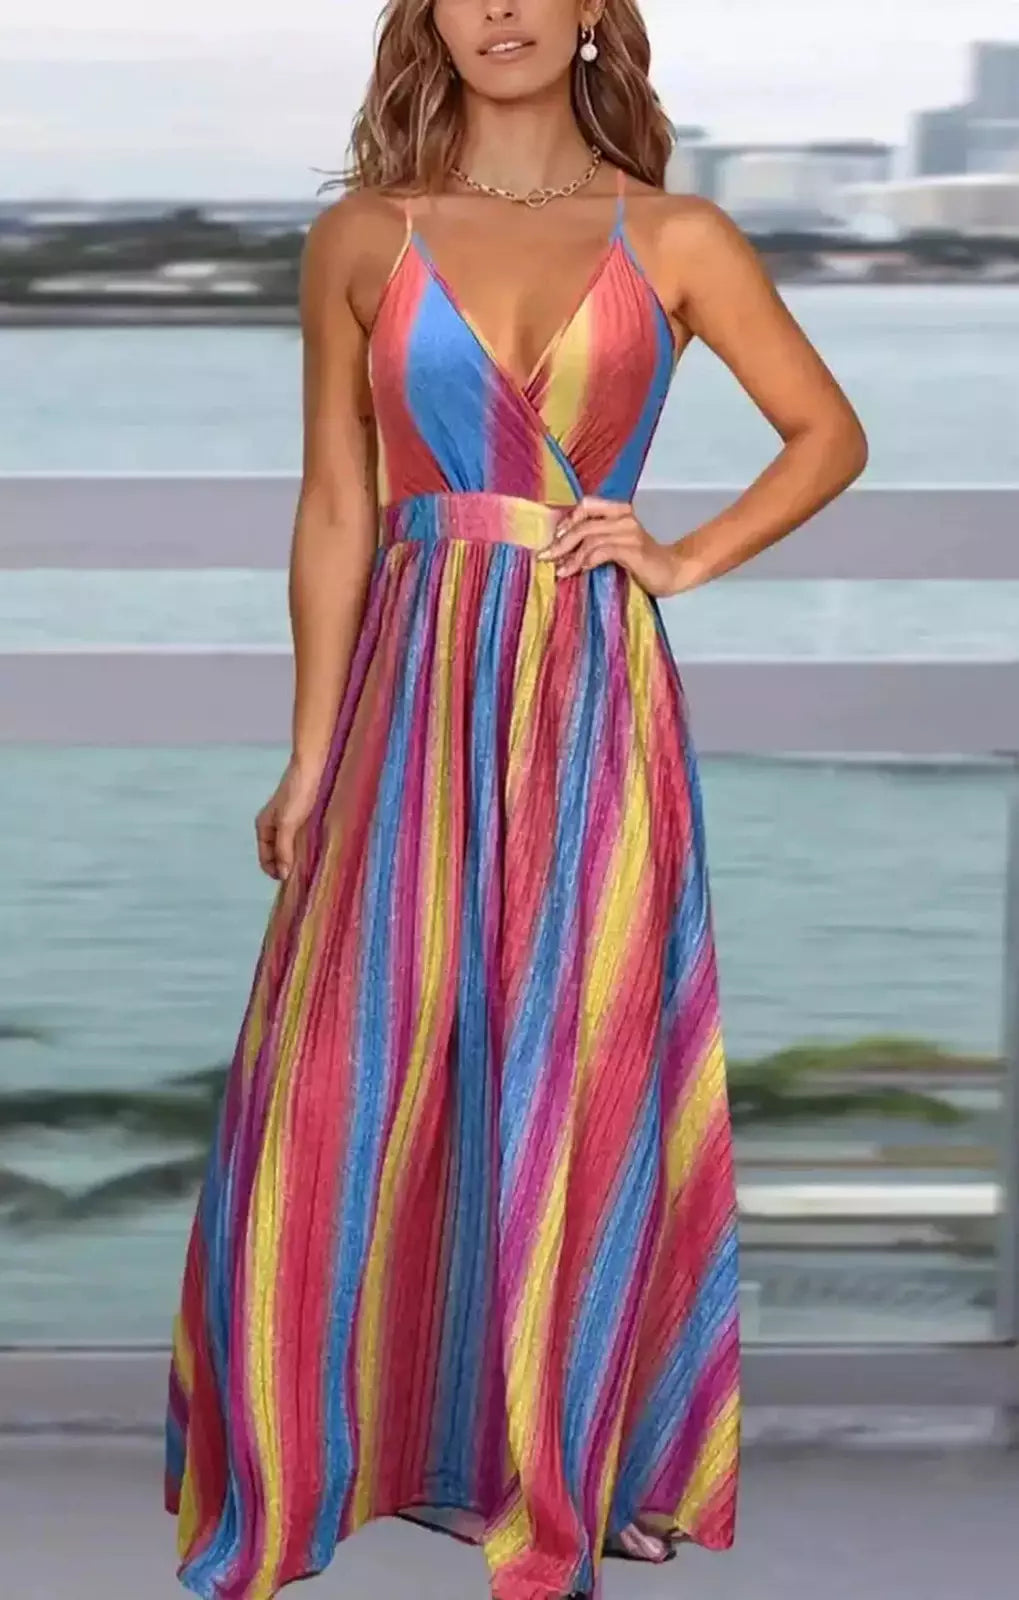 Summer plus size vacation style multicolor stripe Dress